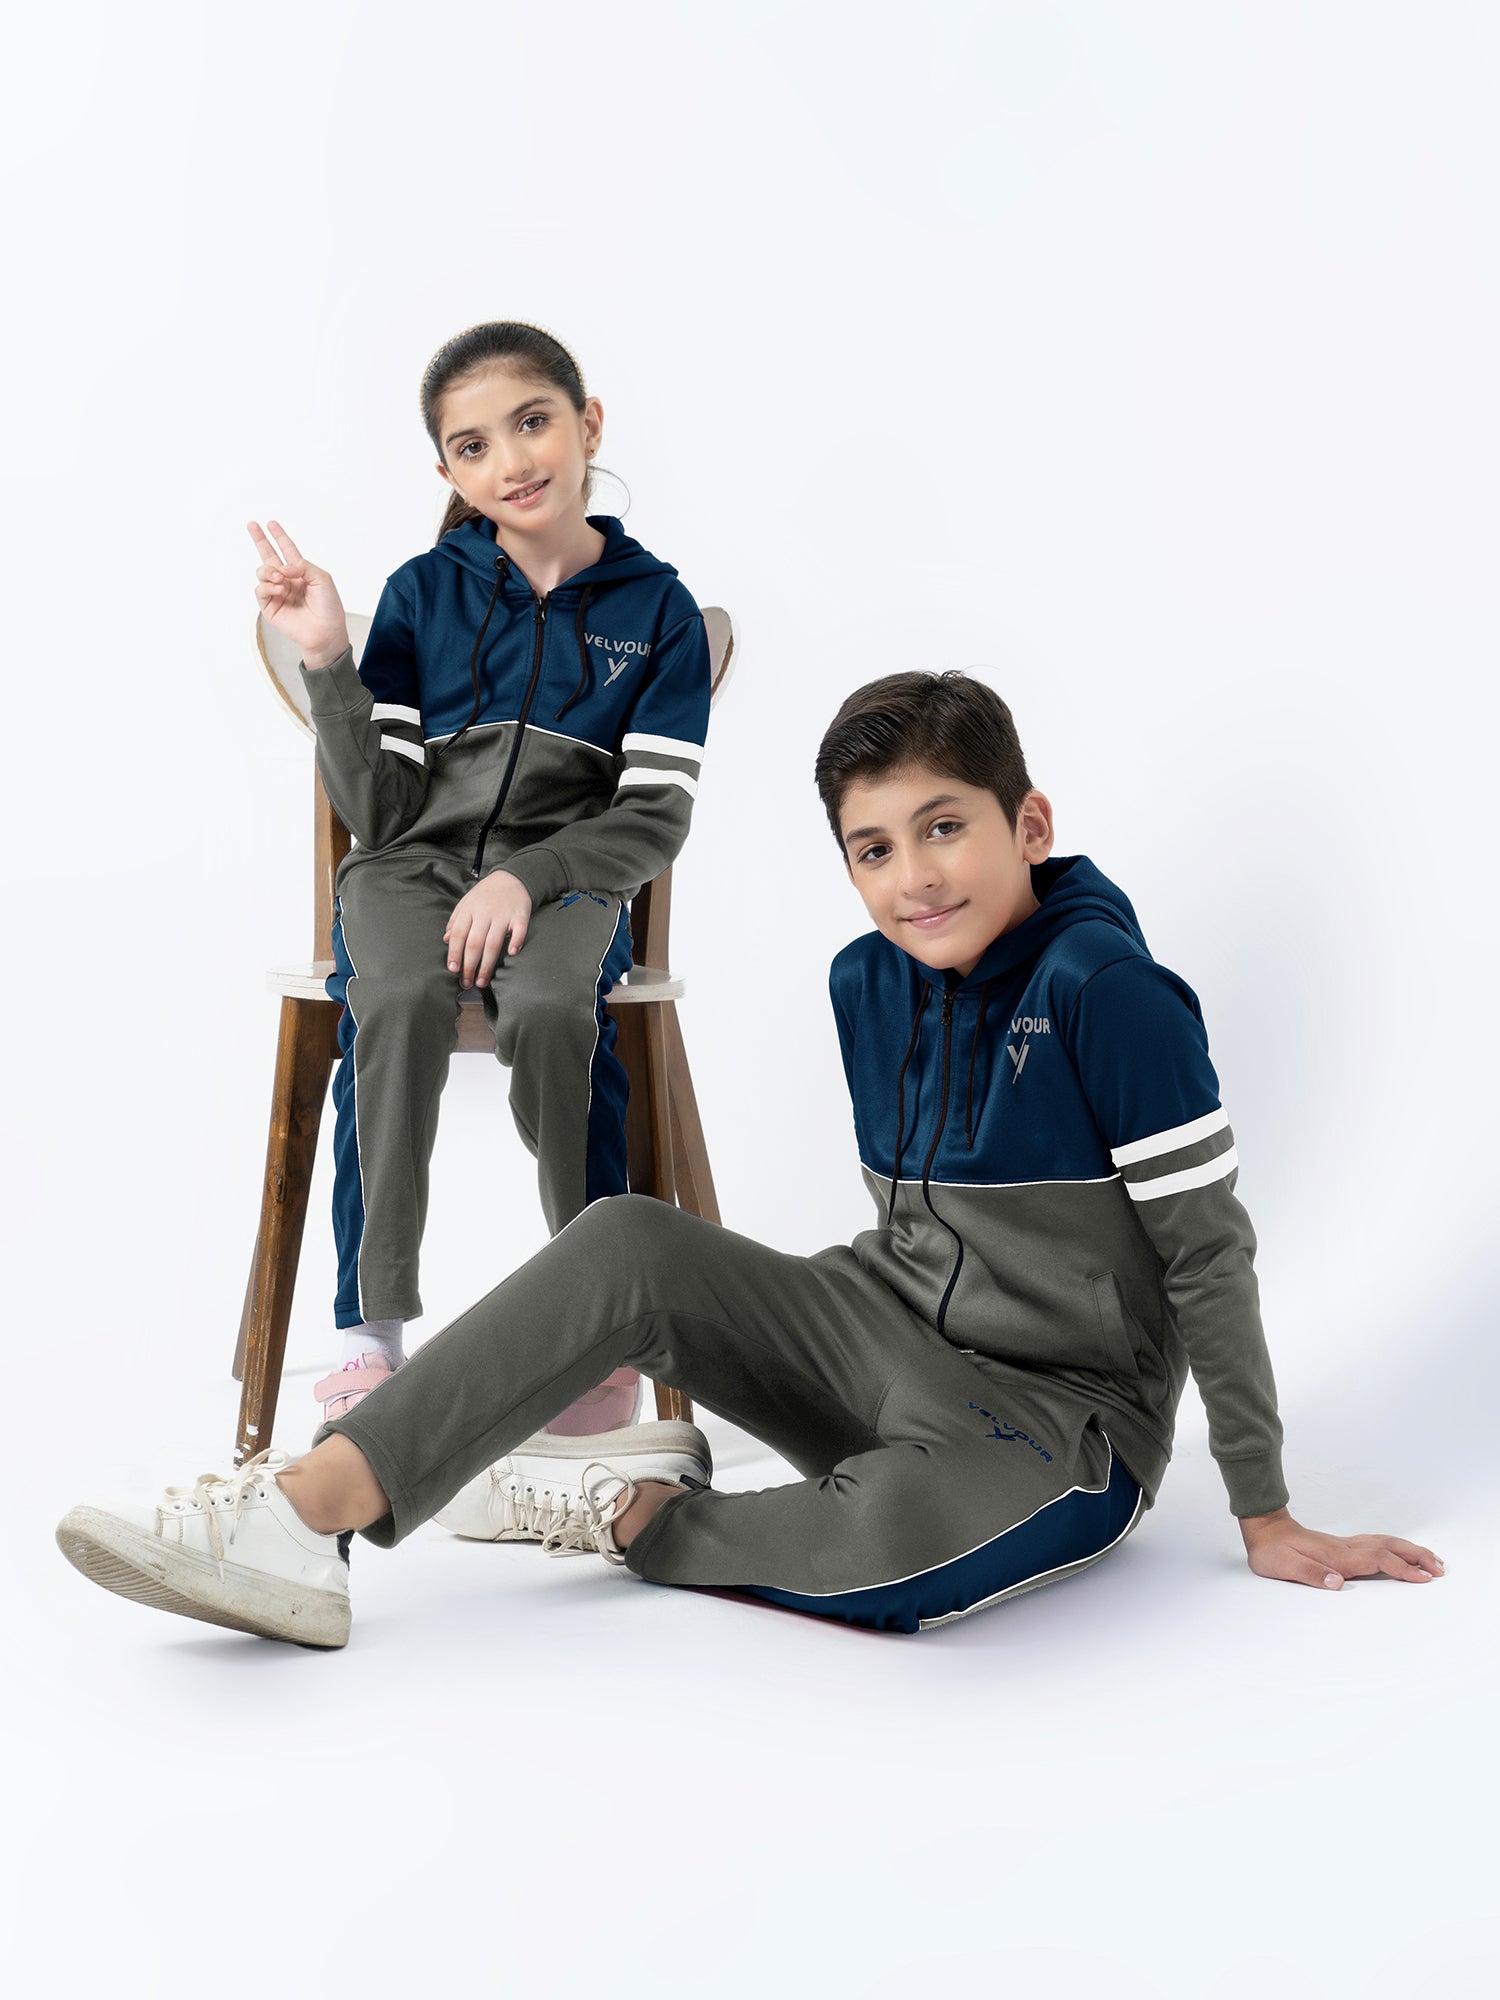 Hooded Tracksuit For Boys & Girls, Poly Athletic Fleece #VWT08-G